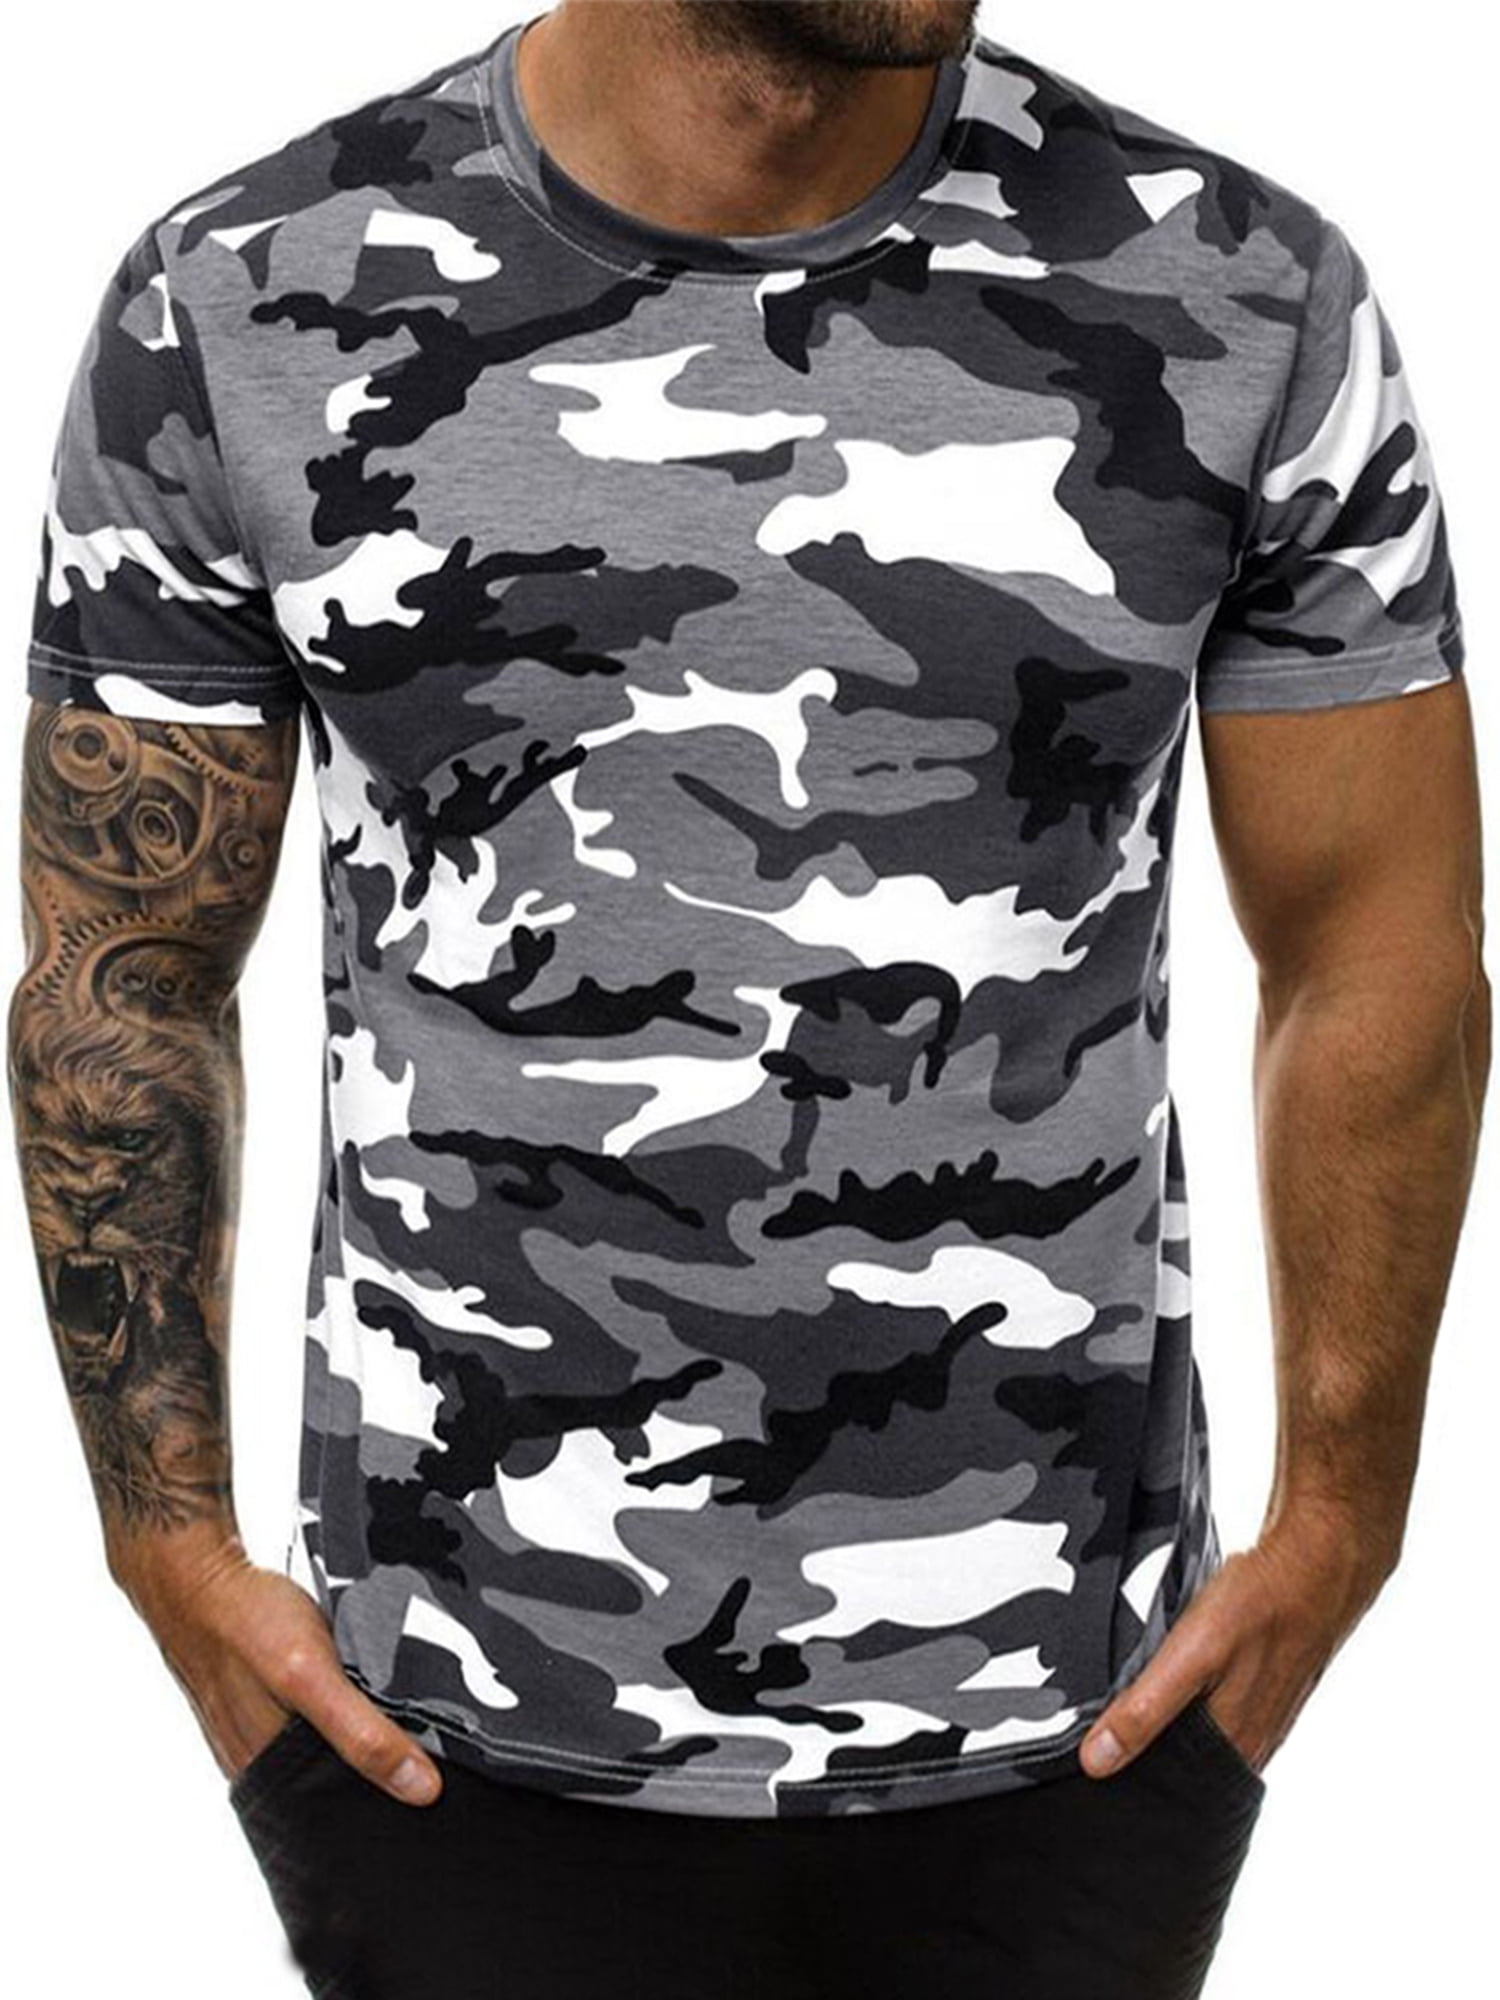 Mens Summer T-Shirt Short Sleeve Round Neck Printed Stretch Fitness Funny Tops Sweatshirt Pullover Tees for Gym Sport Military Casual Comfy Shirt 